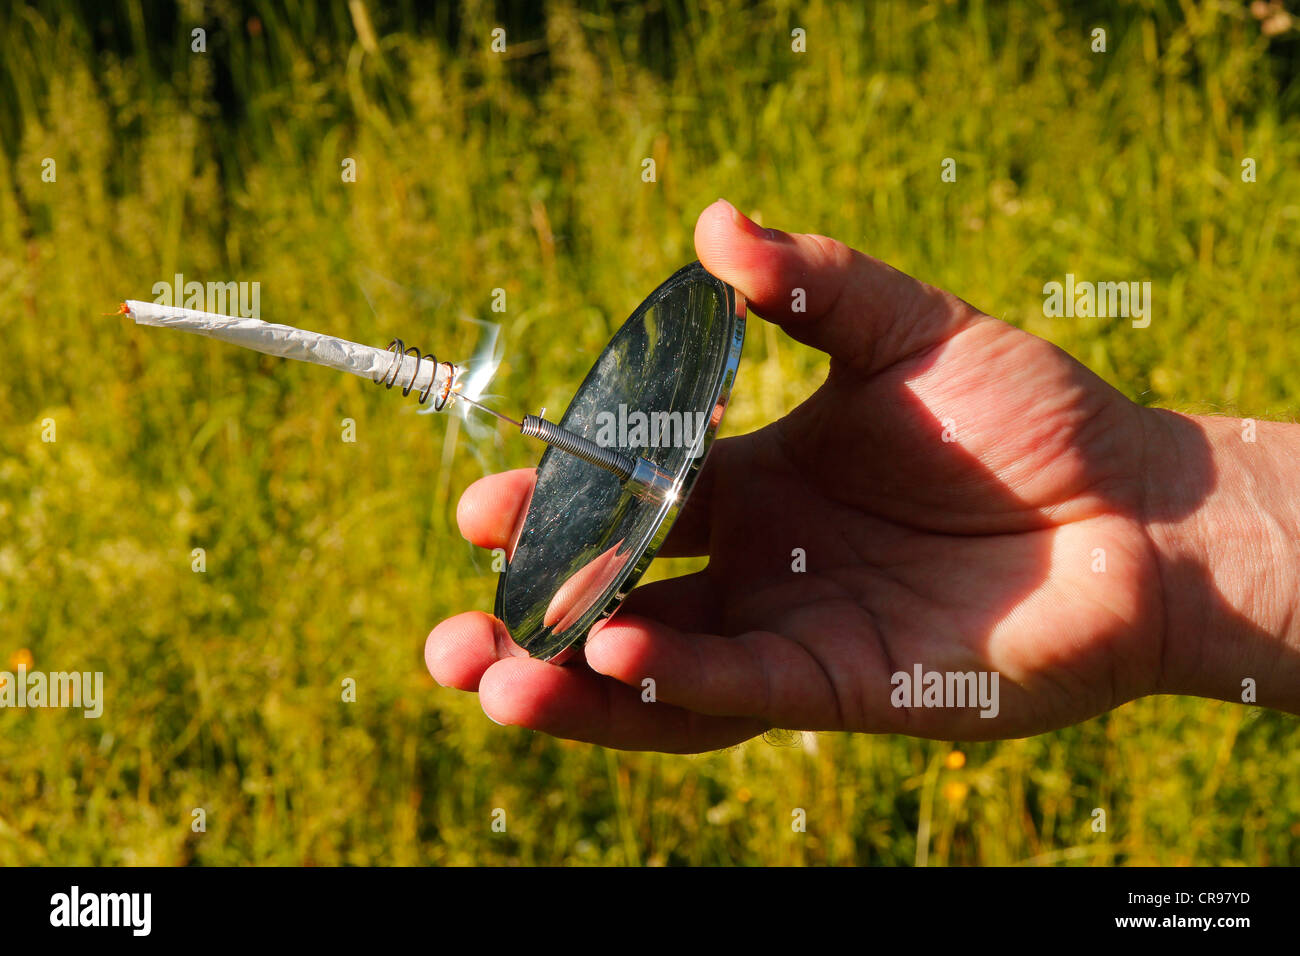 Hand holding a solar cigarette lighter, concave mirror Stock Photo